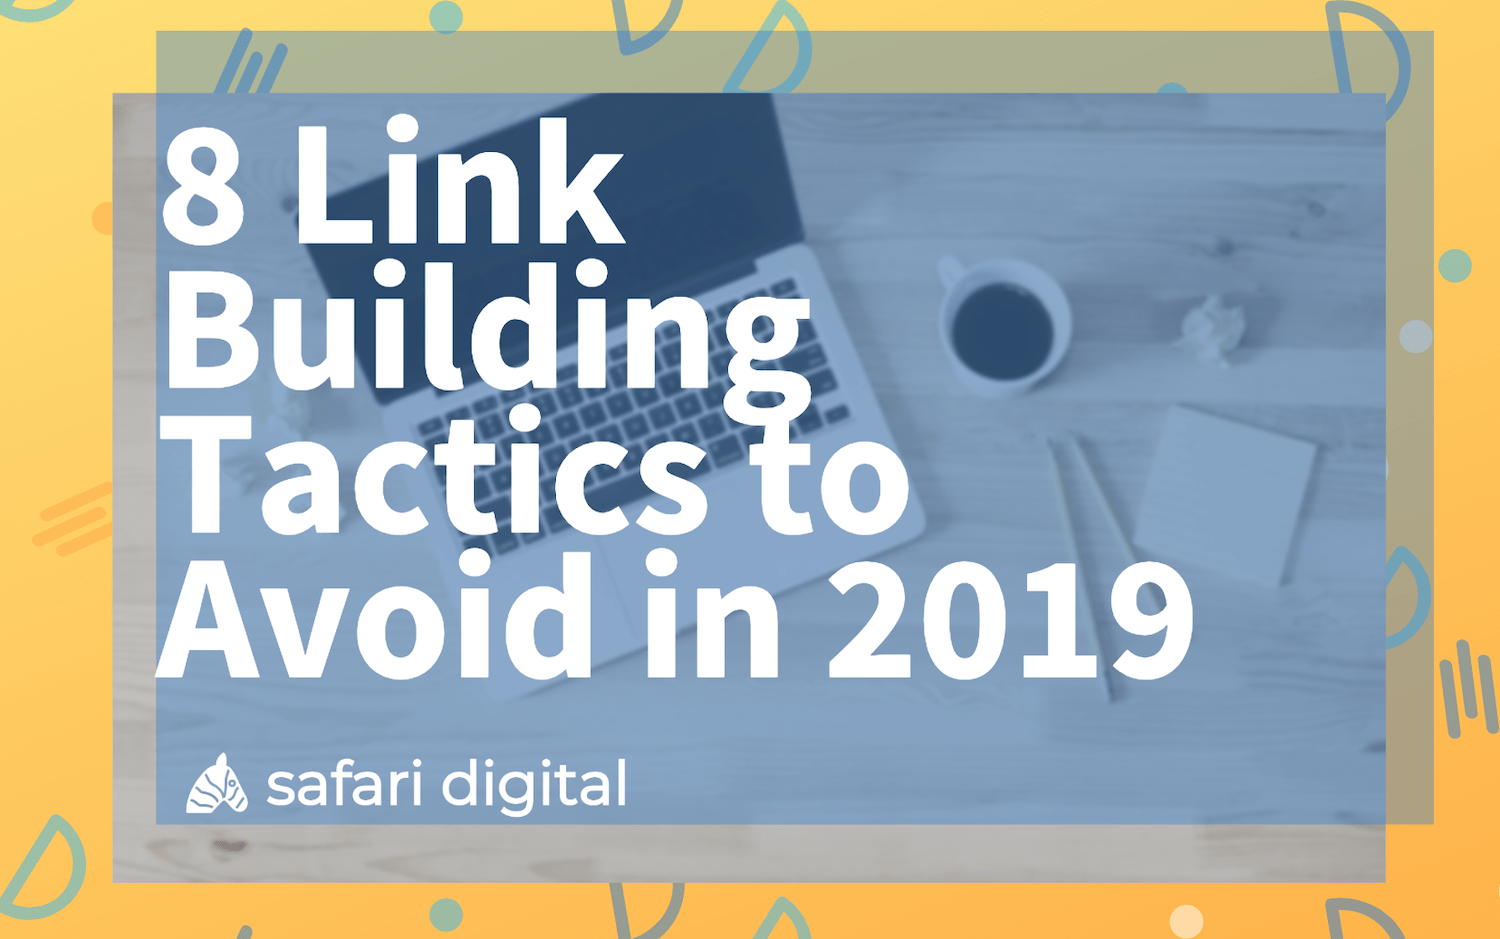 8 link building tactics to avoid in 2019 banner image Large